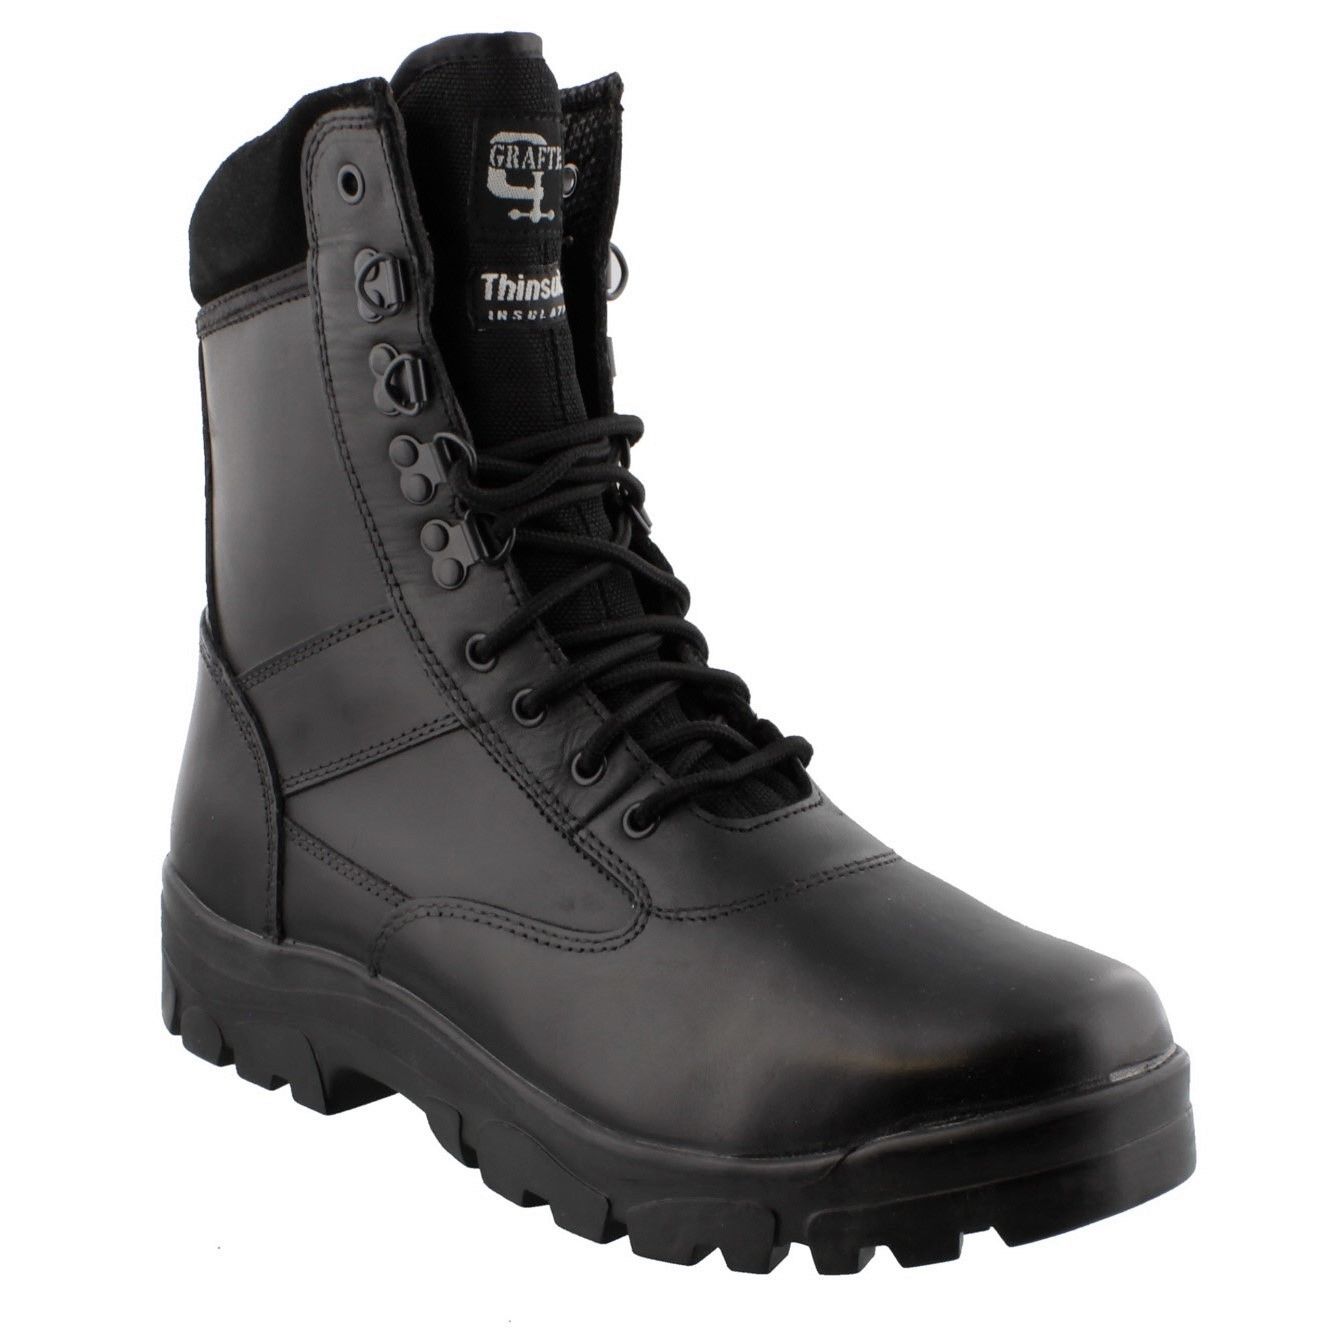 Mens Grafters Military Combat Police Cadet Steel Sole Hi-Leg Boots ...